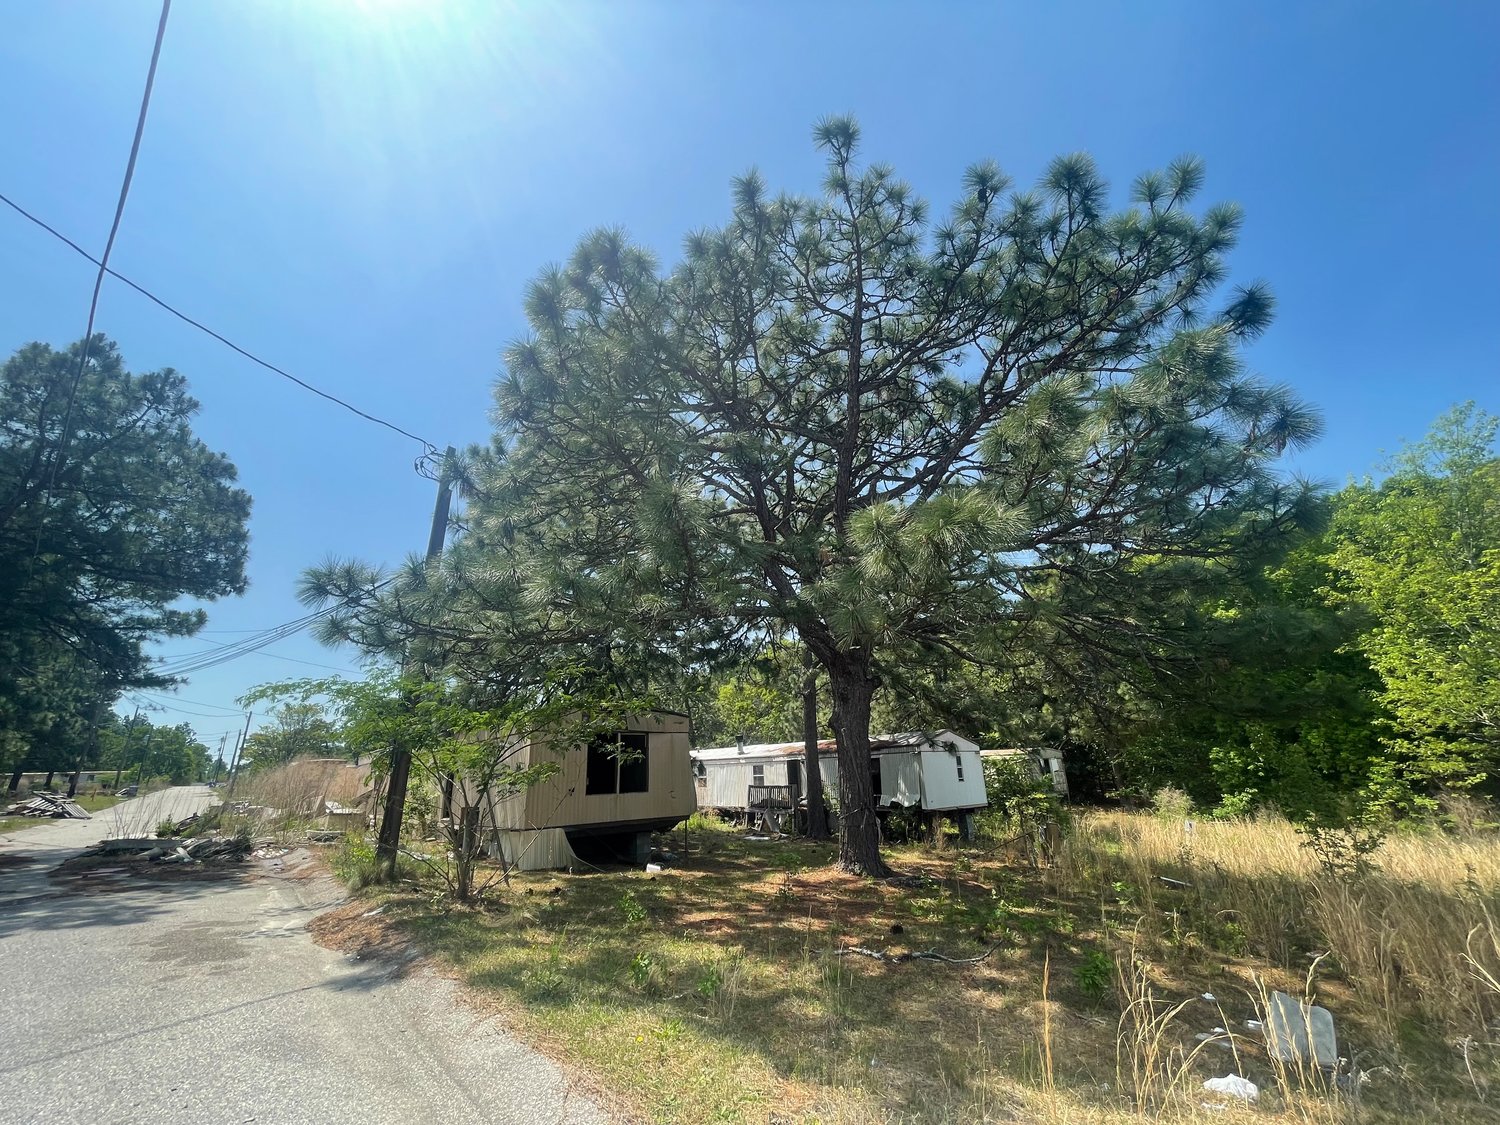 An area behind Pine Tree Lane in Spring Lake was among the properties acquired by Time Out Properties. The property management company is buying mobile home parks in Spring Lake and elsewhere with the intention of cleaning them up and bringing in energy-efficient units to replace older models.